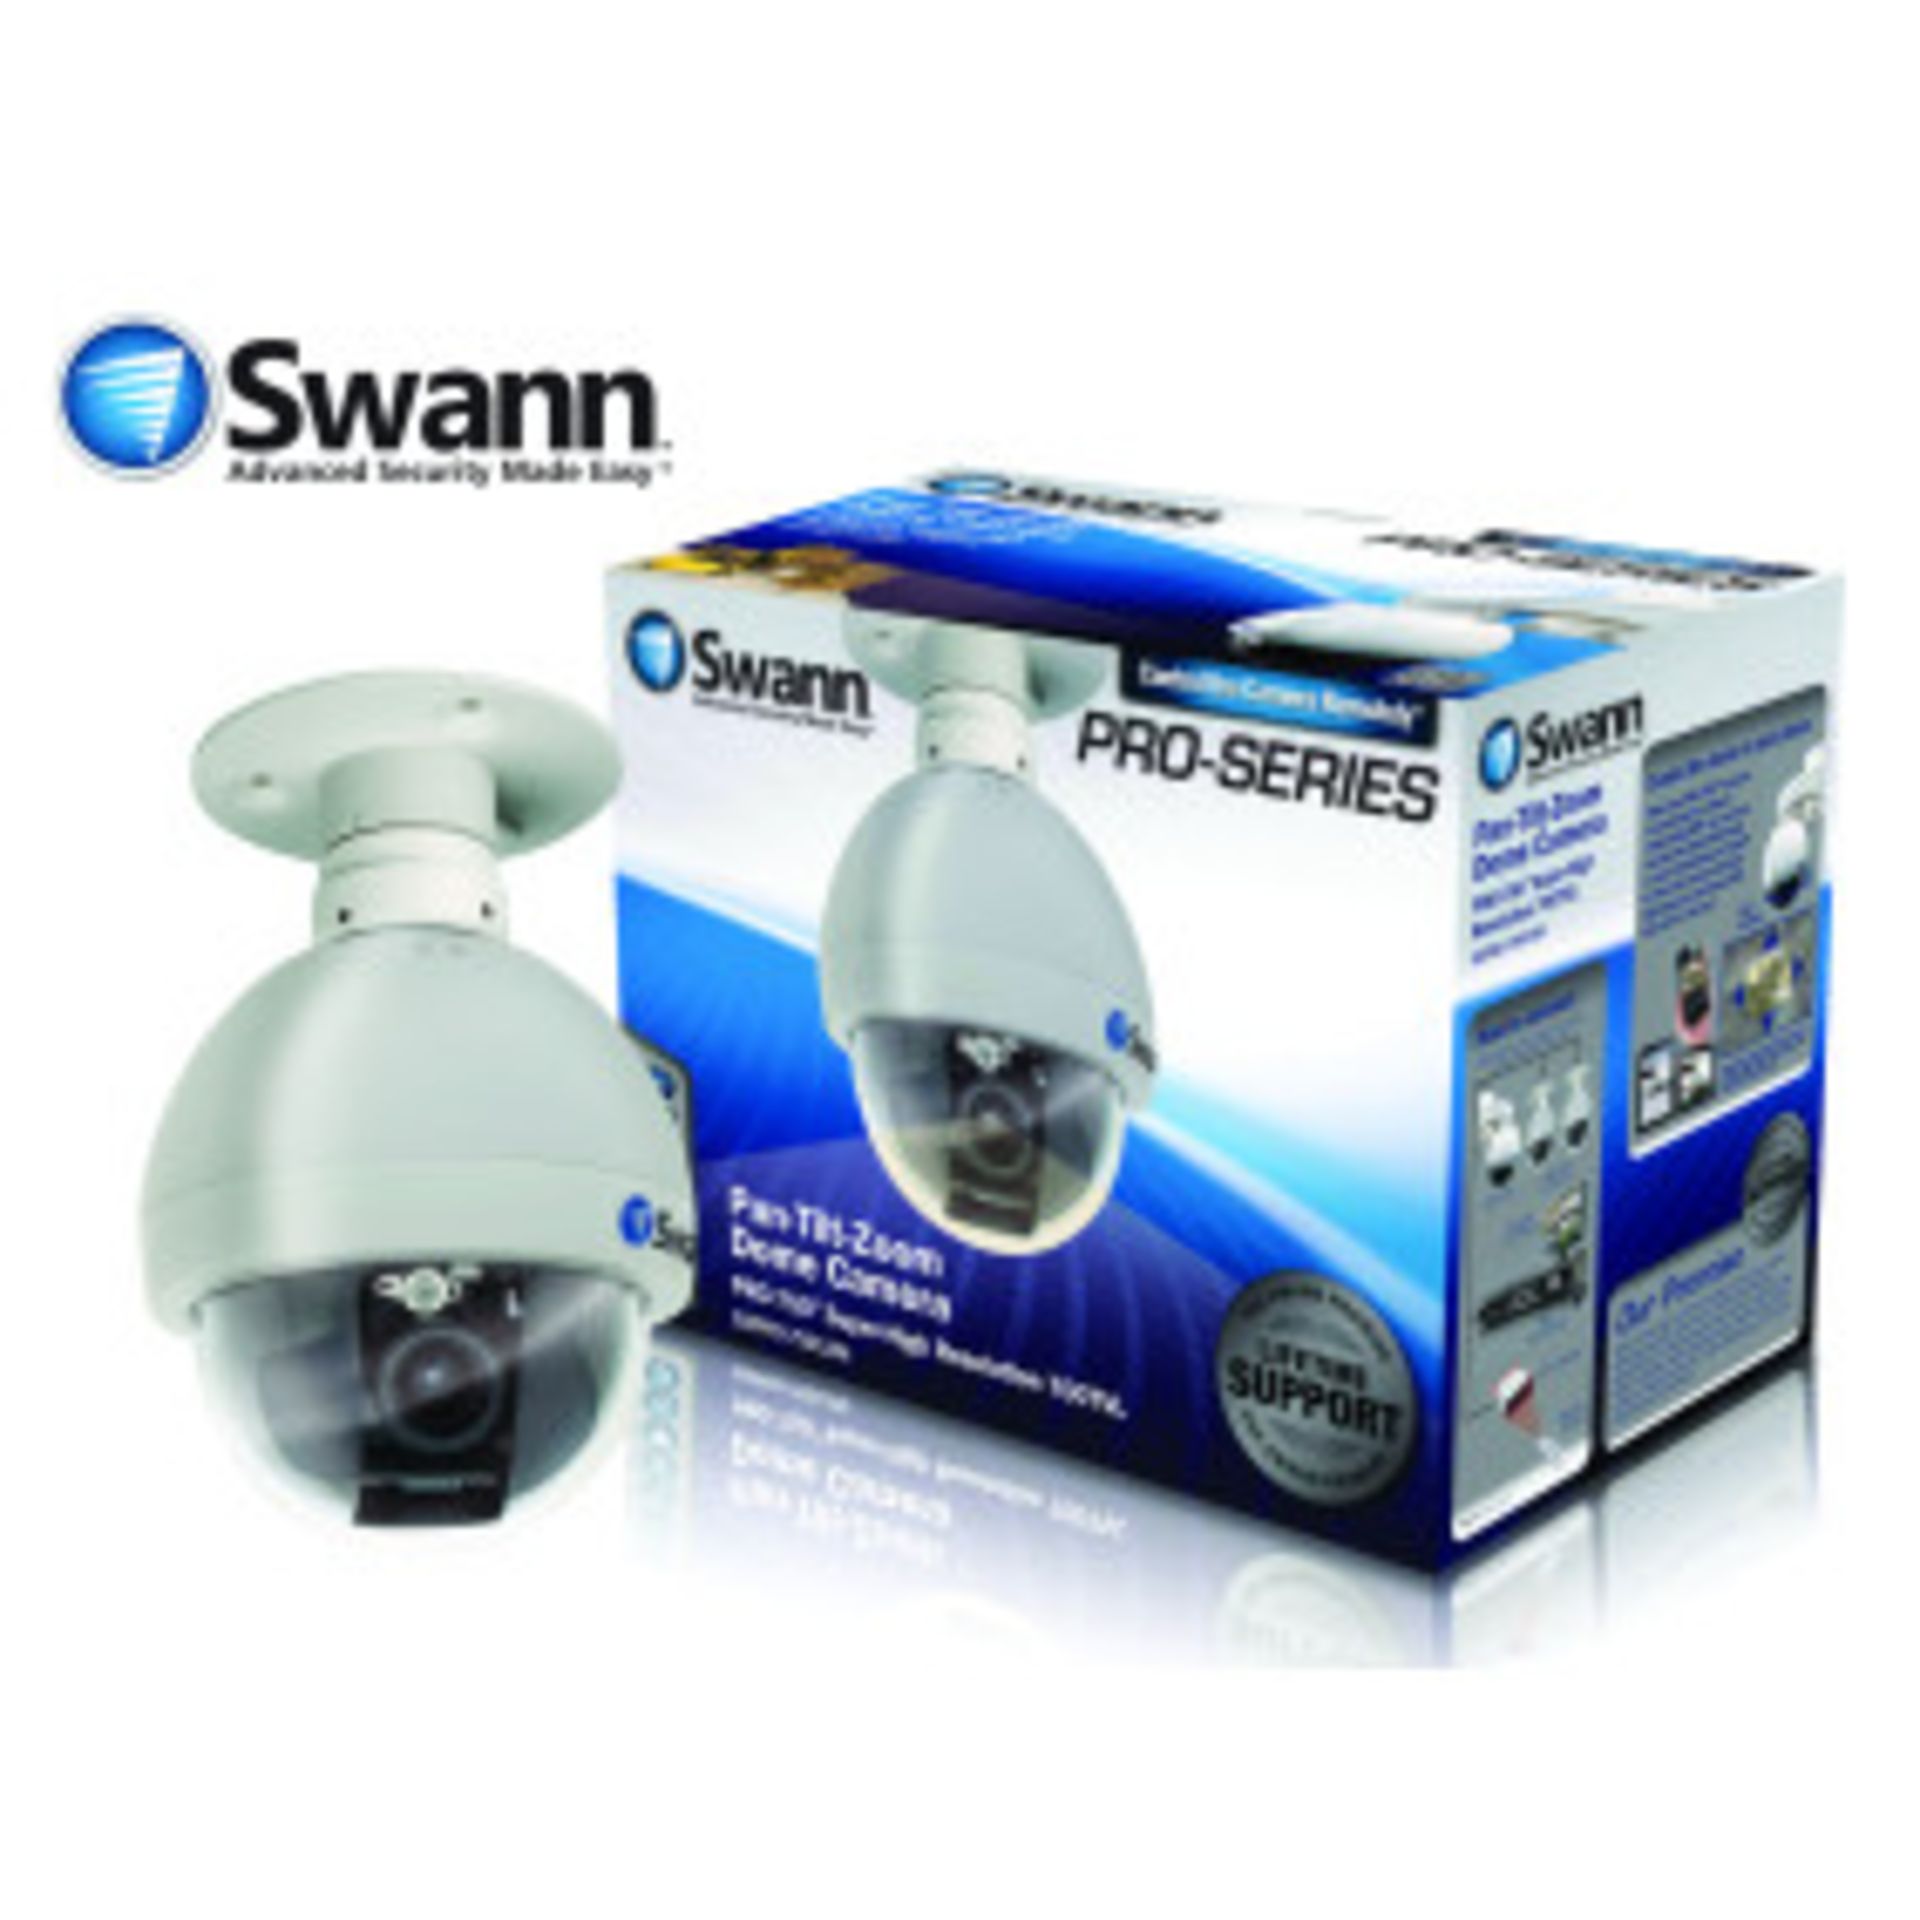 V Brand New Swann PRO-750 700TVL PTZ (Pan Tilt Zoom) Dome Camera - Variable Viewing Angle From 30 to - Image 2 of 3